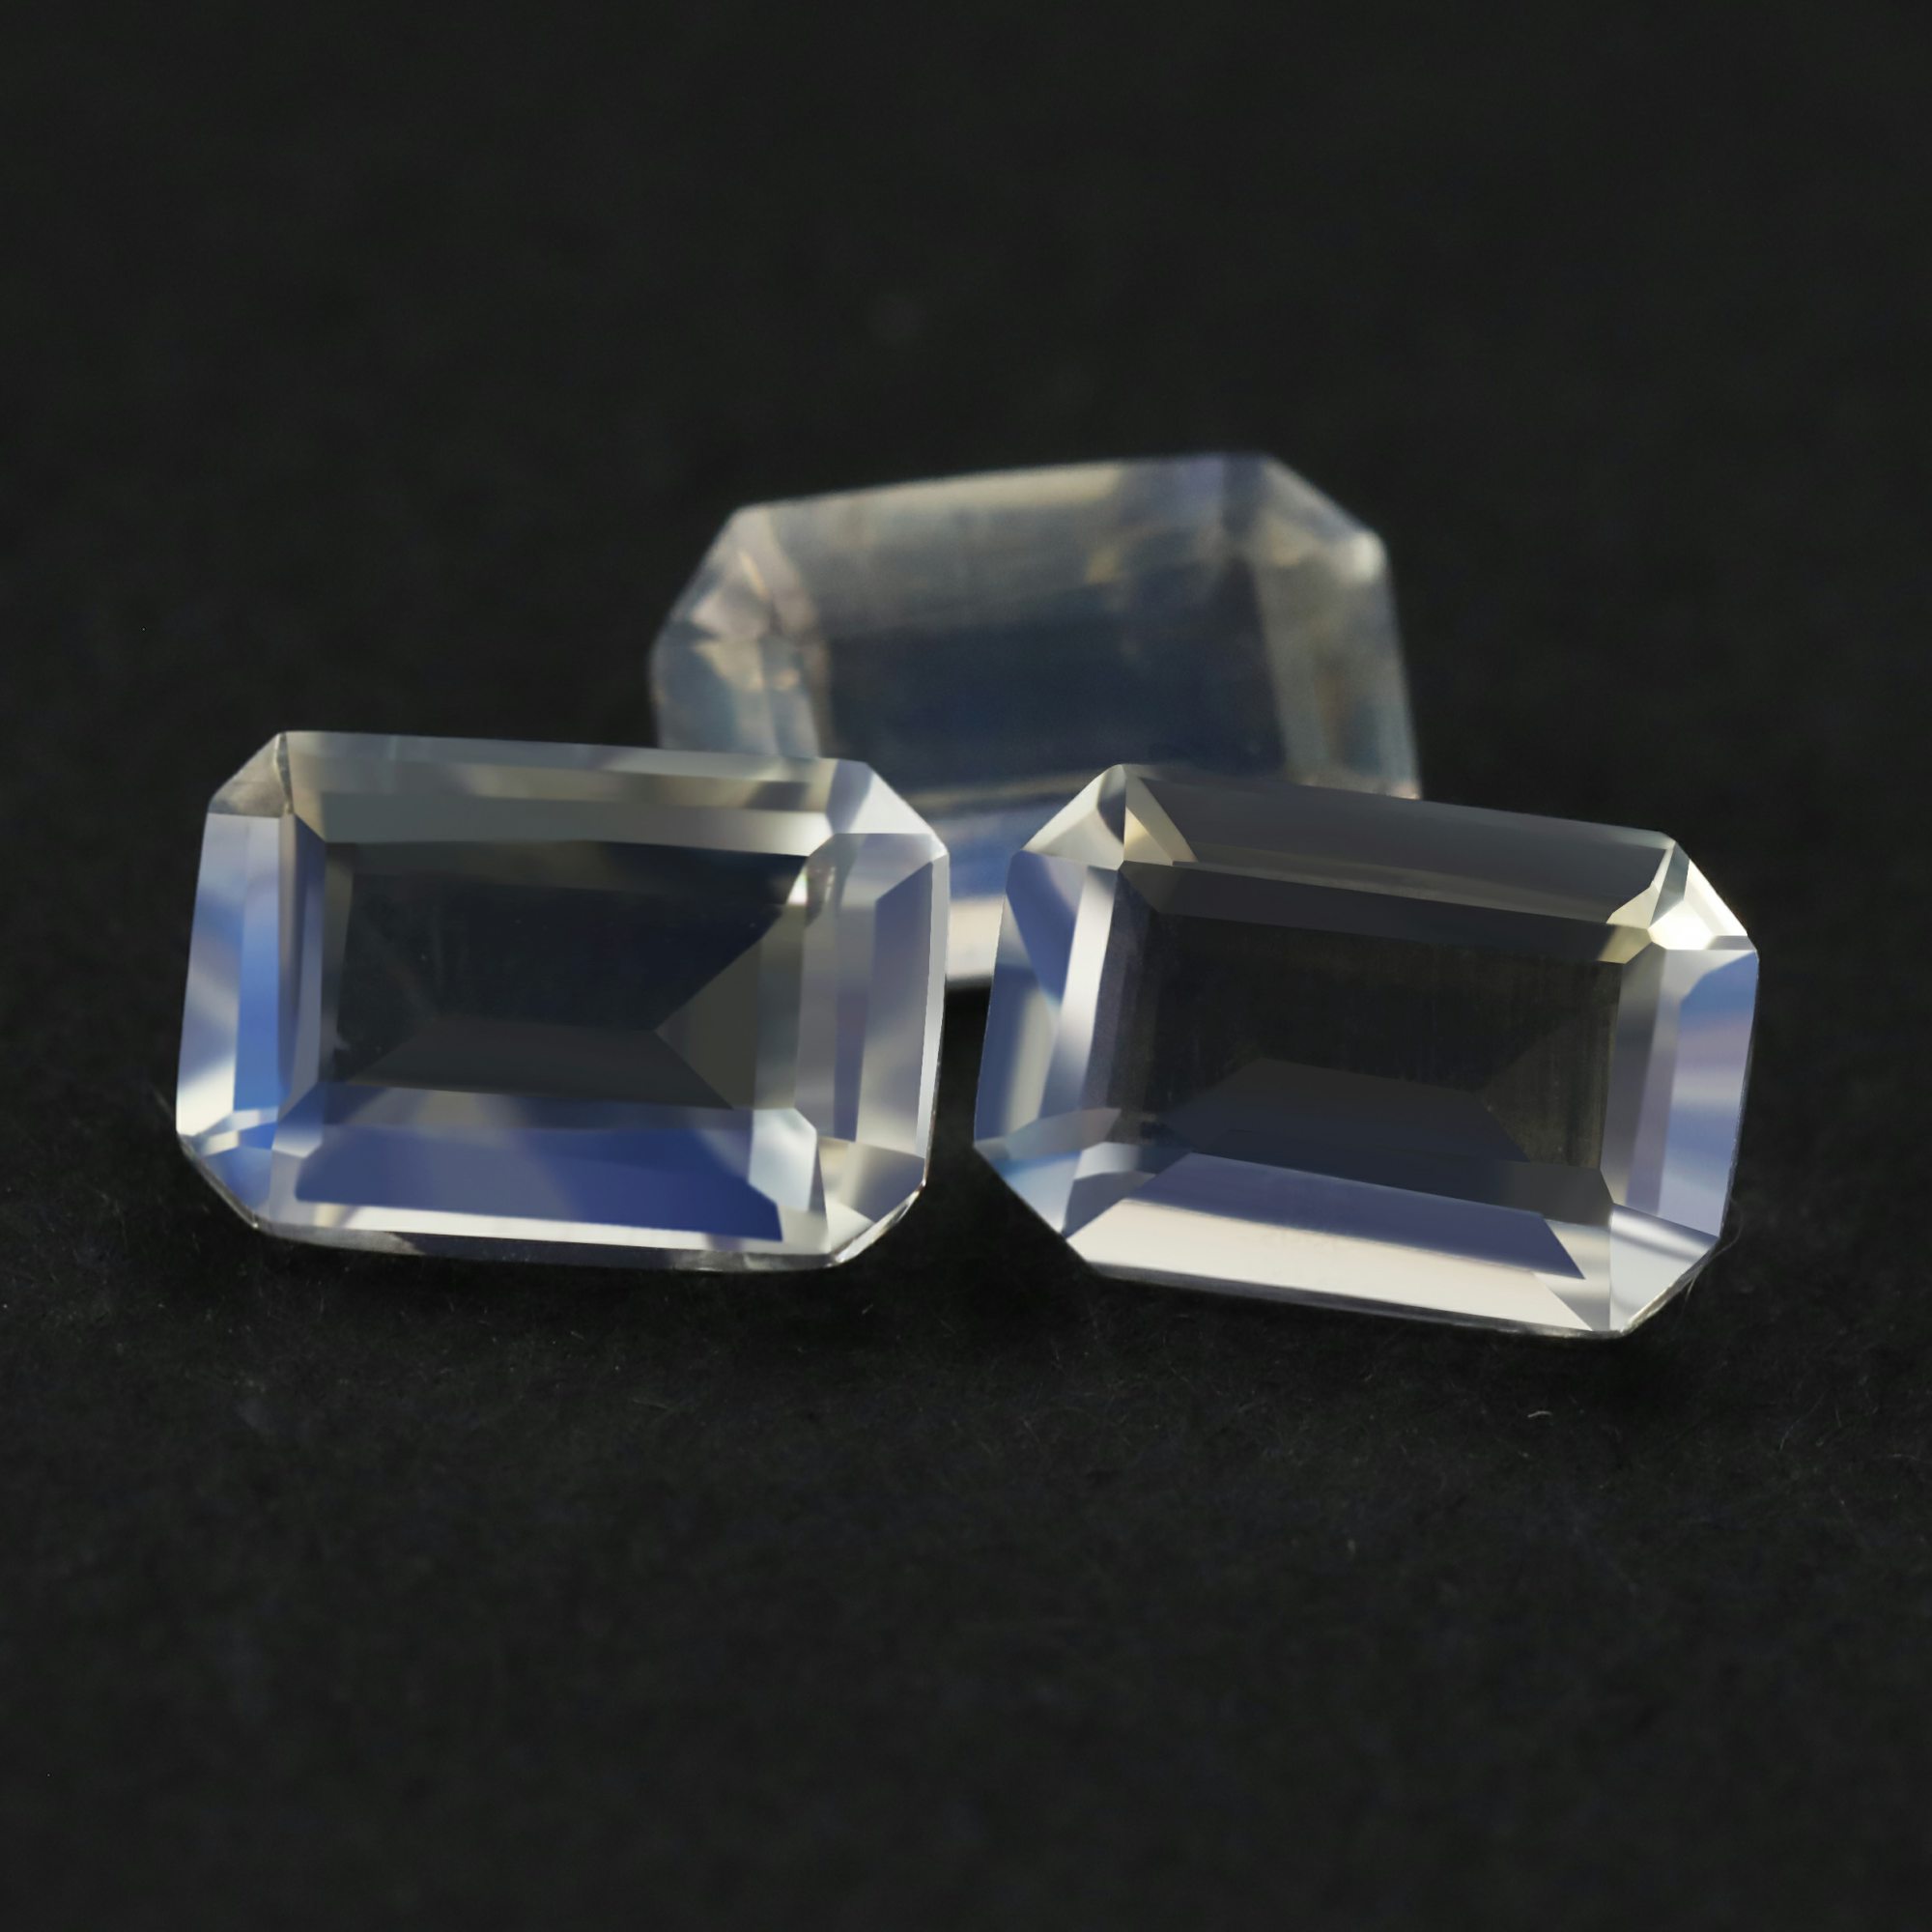 1Pcs 4x6MM Emerald Cut Blue Moonstone June Birthstone Rectangle Faceted Loose Gemstone Natural Semi Precious Stone Mood DIY Jewelry Supplies 4170021 - Click Image to Close